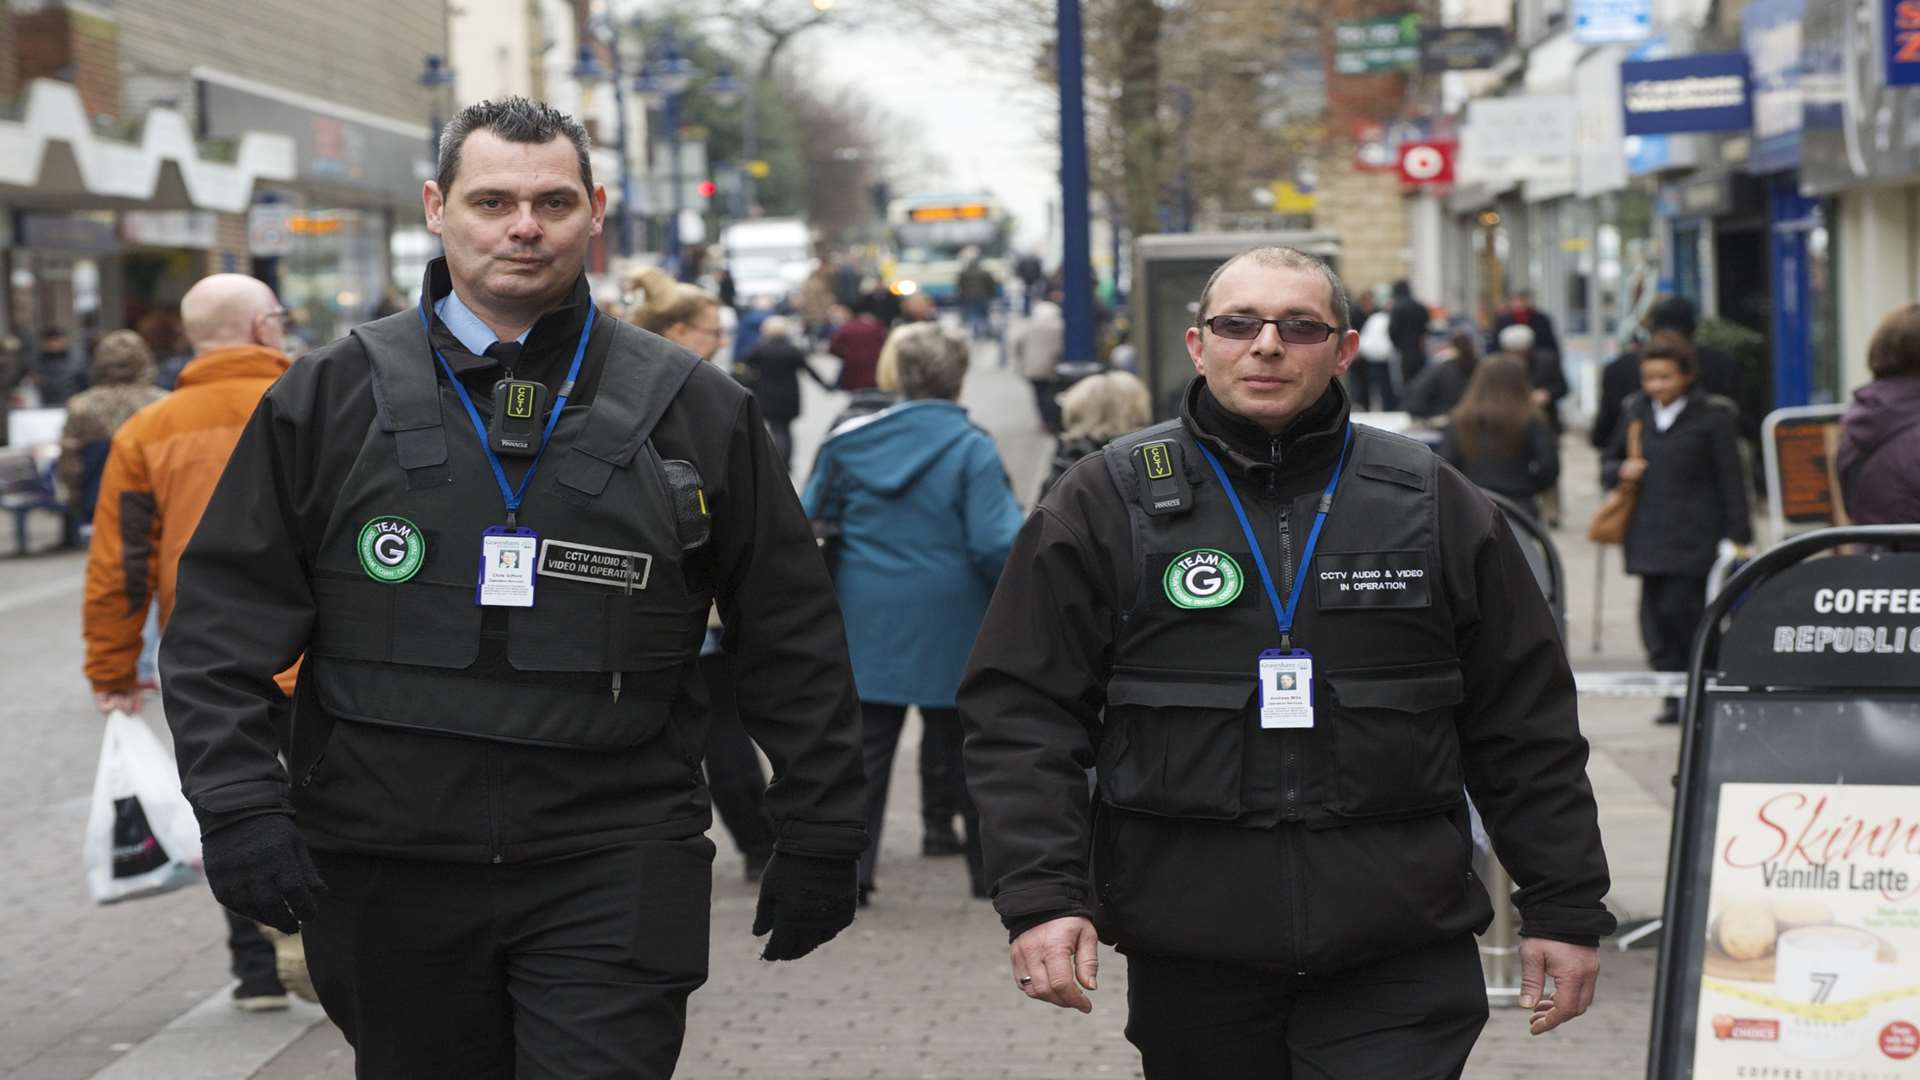 Litter officers have patrolled Gravesend town centre since February